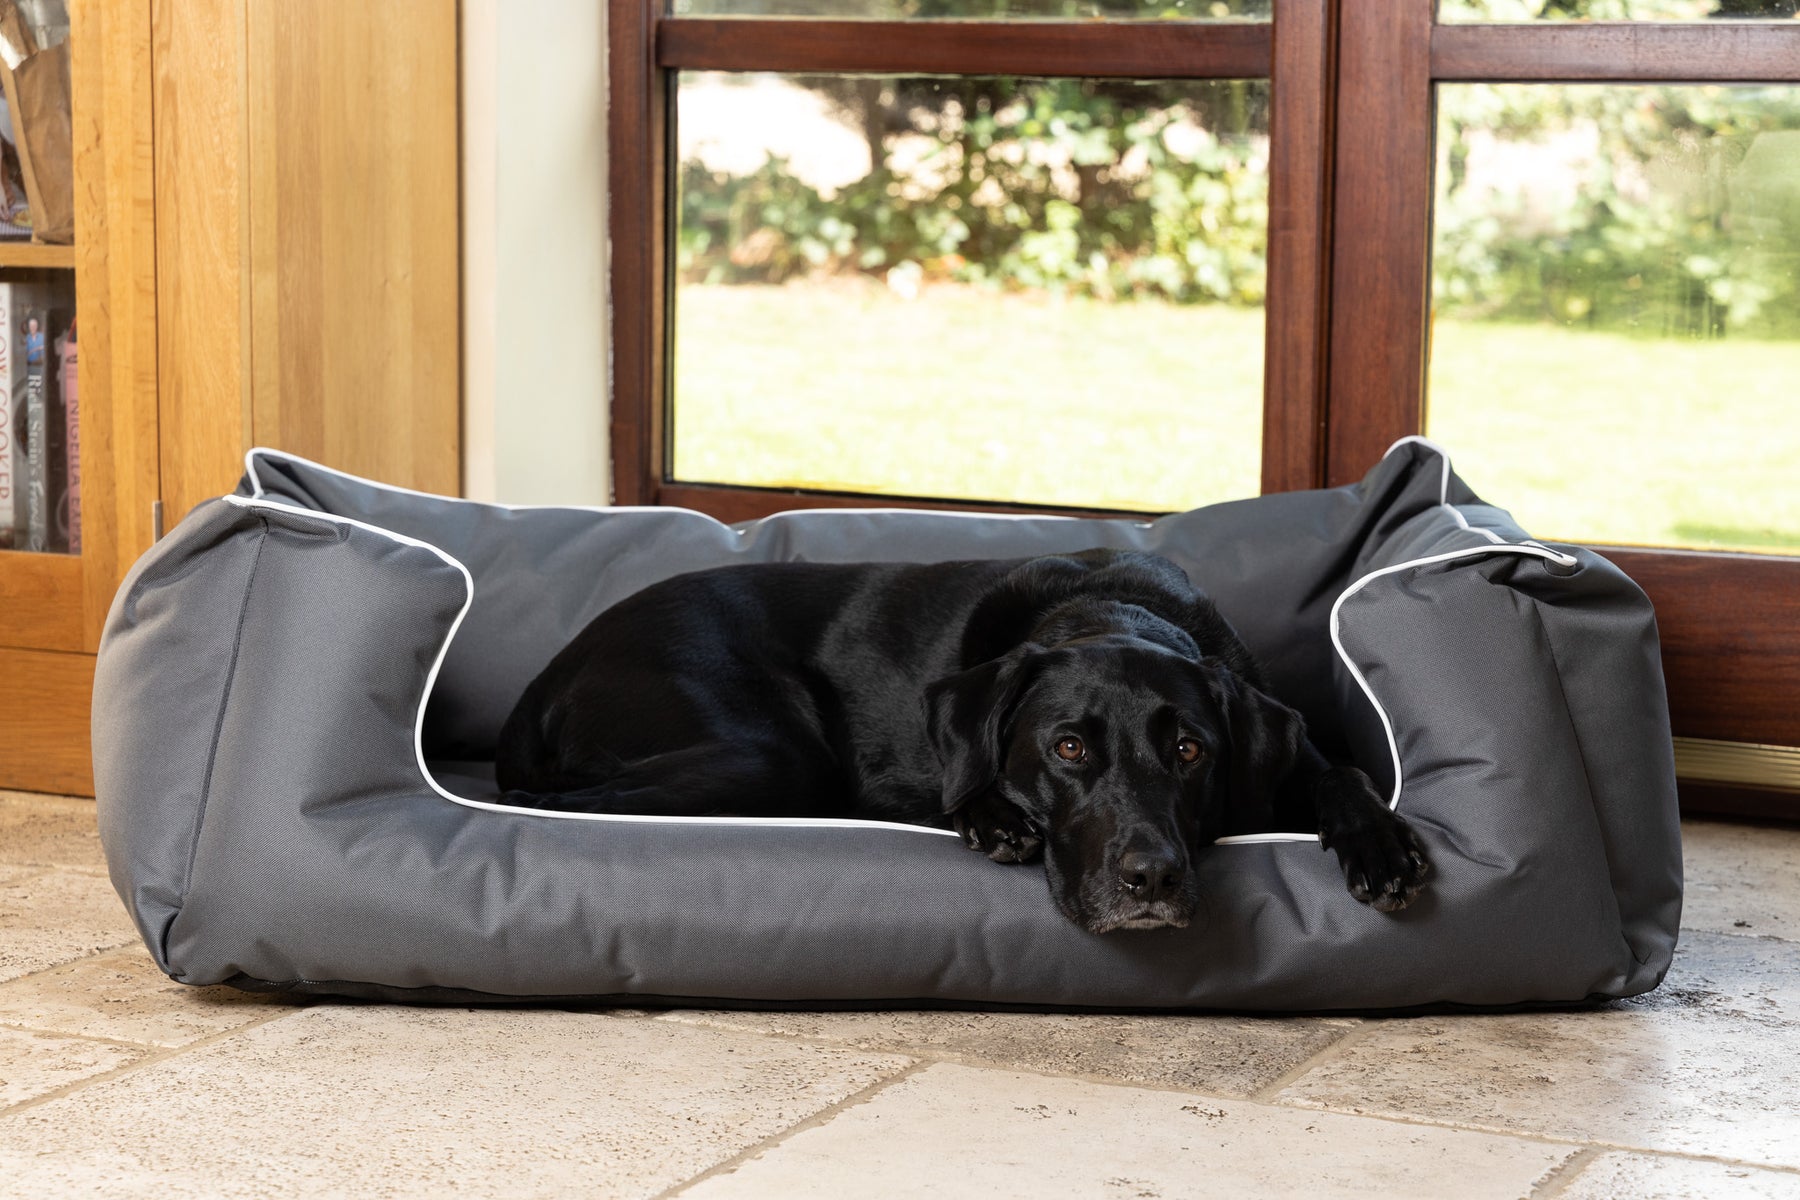 What are the Best Dog Beds for Large Dogs?